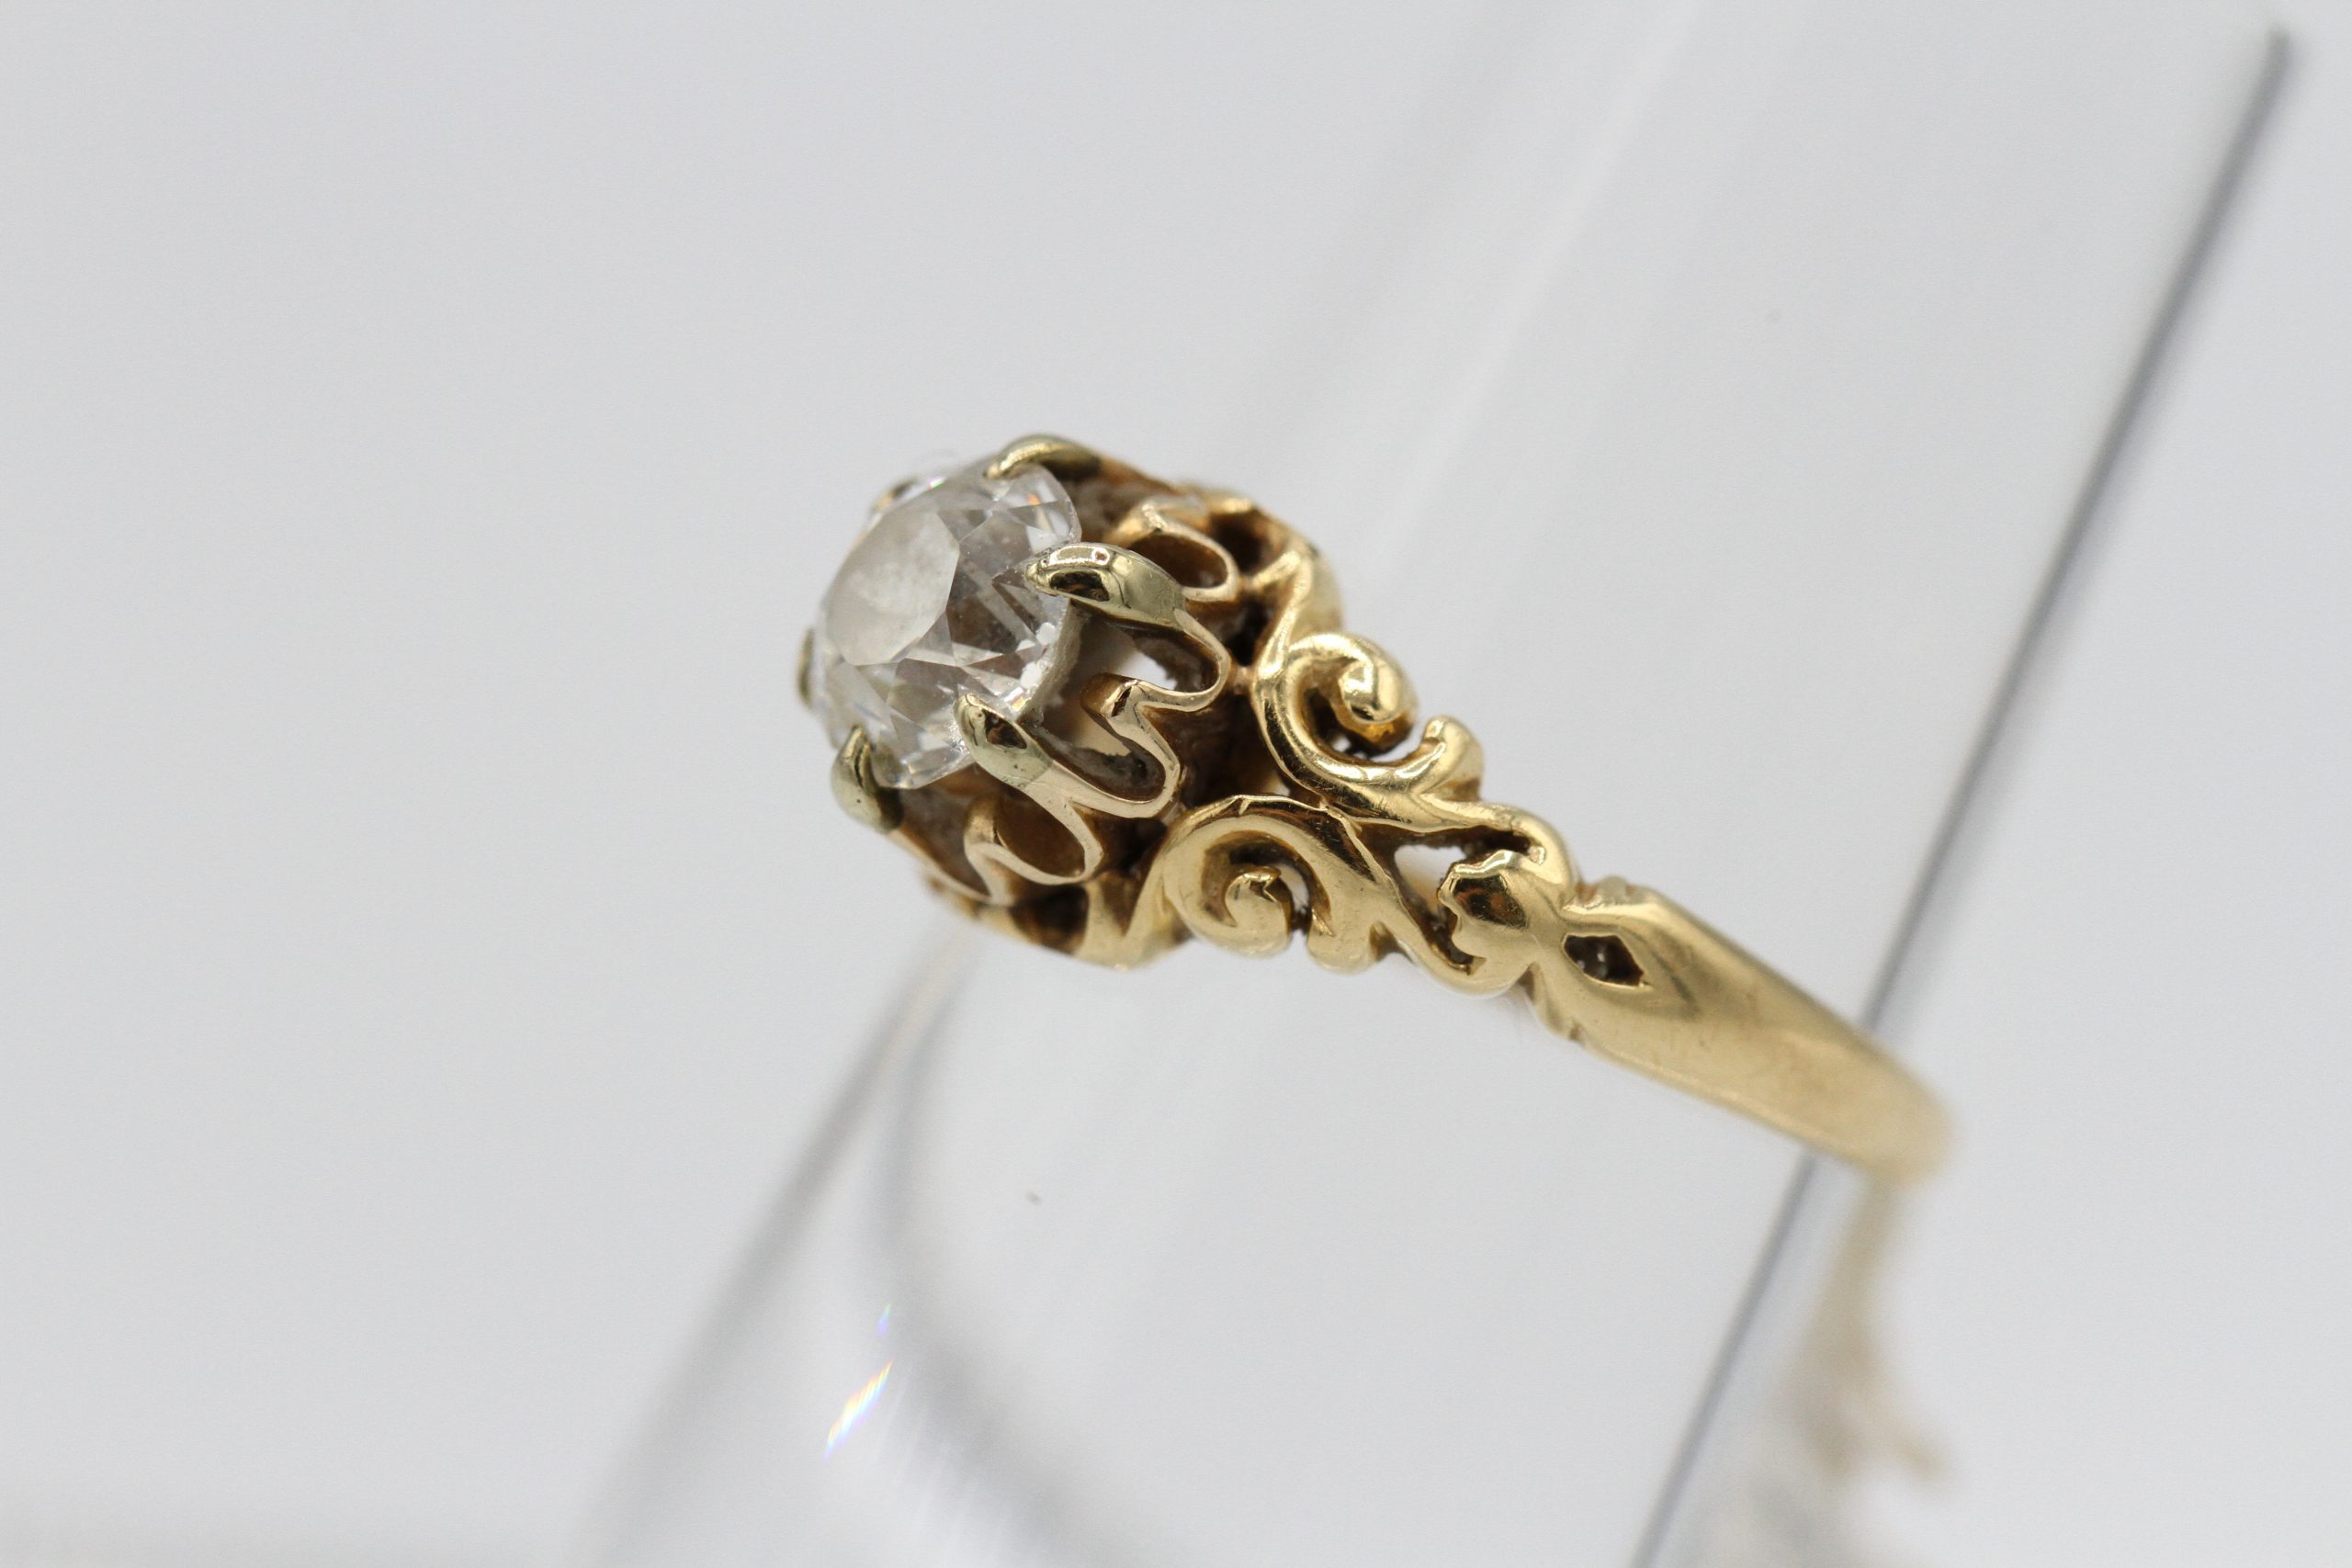 An ornate gold ring with a large diamond centerpiece